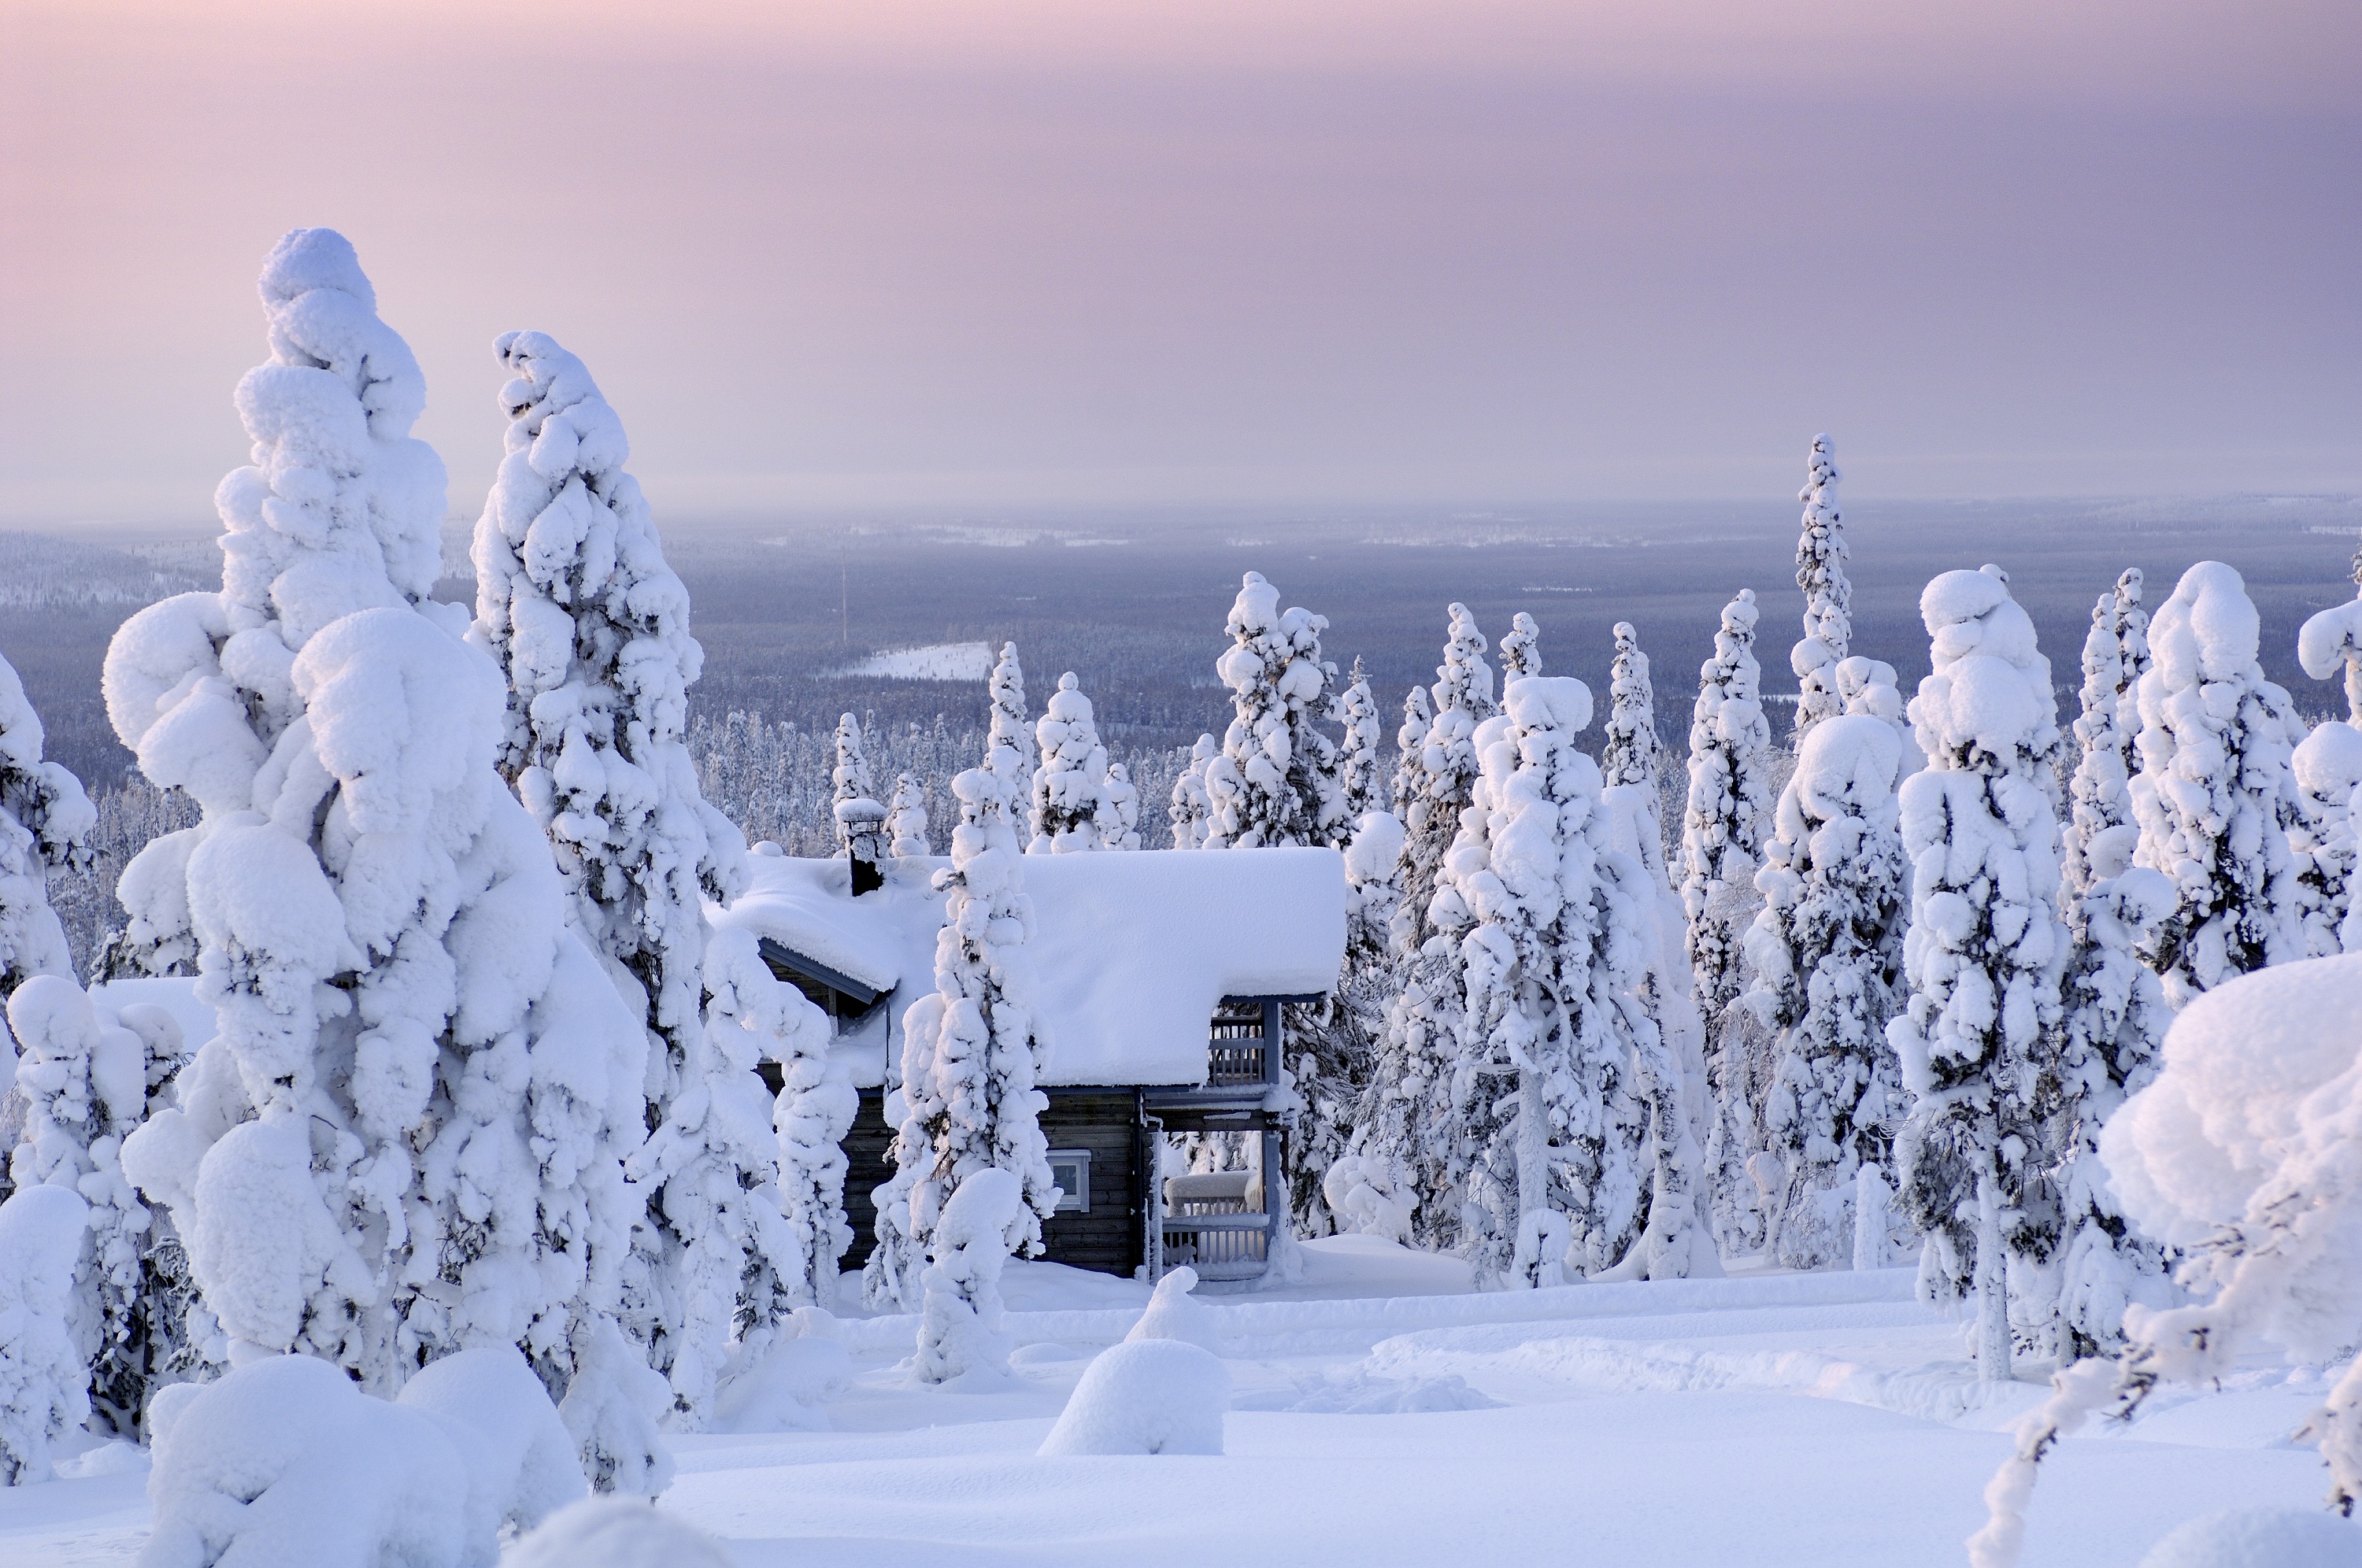 A snow covered hut nestled between trees in the Finnish countryside in winter